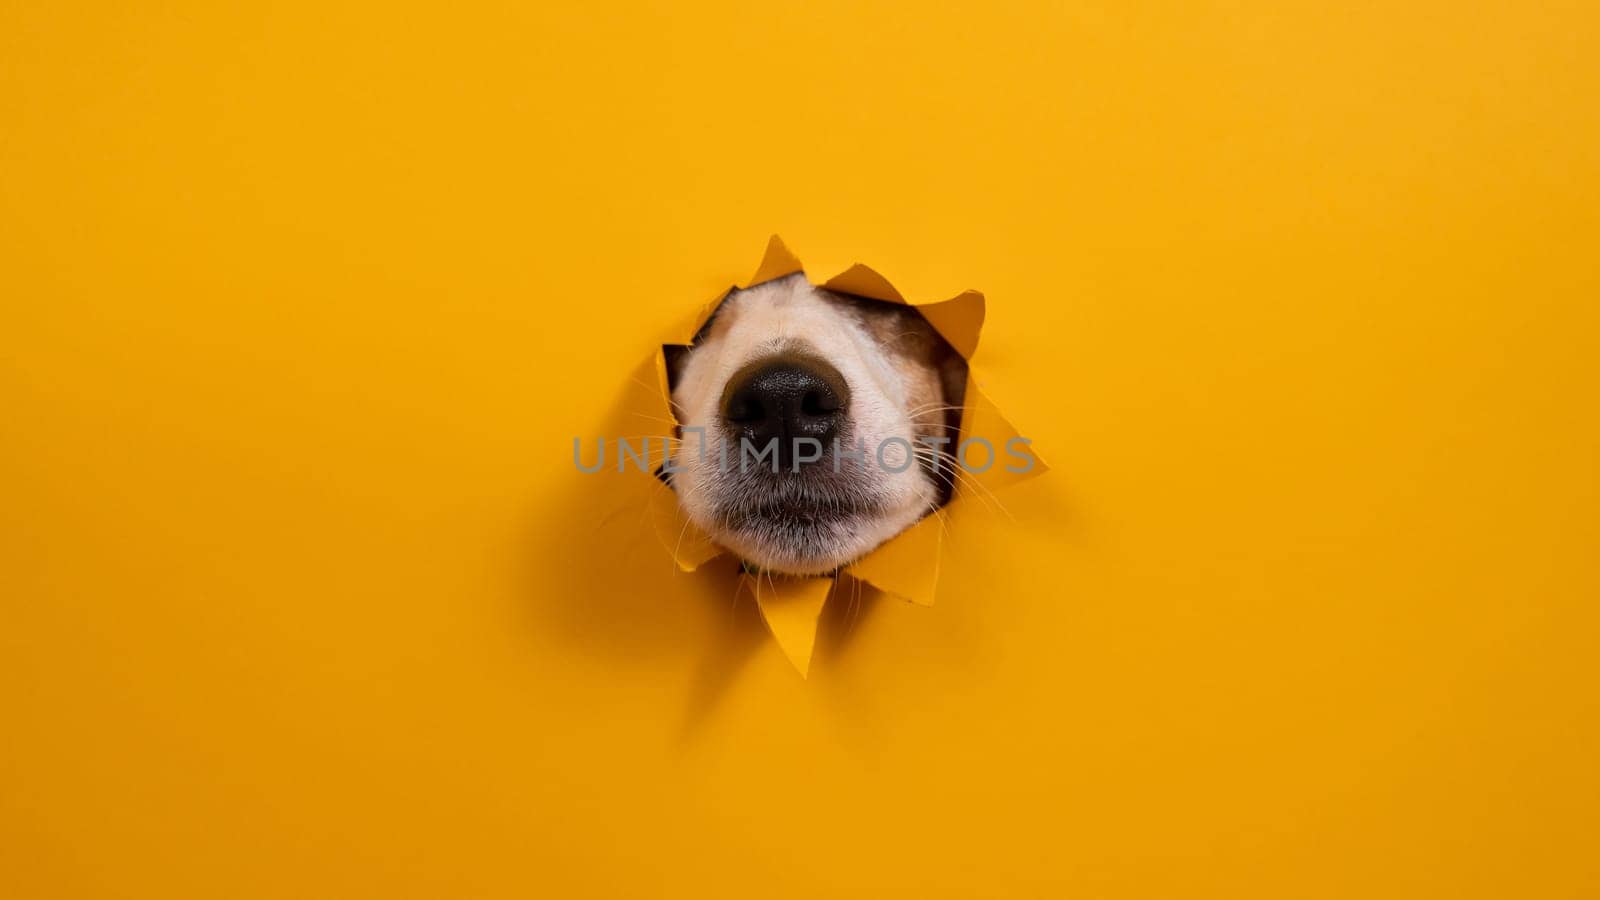 Jack Russell Terrier dog nose sticking out of torn paper orange background. by mrwed54